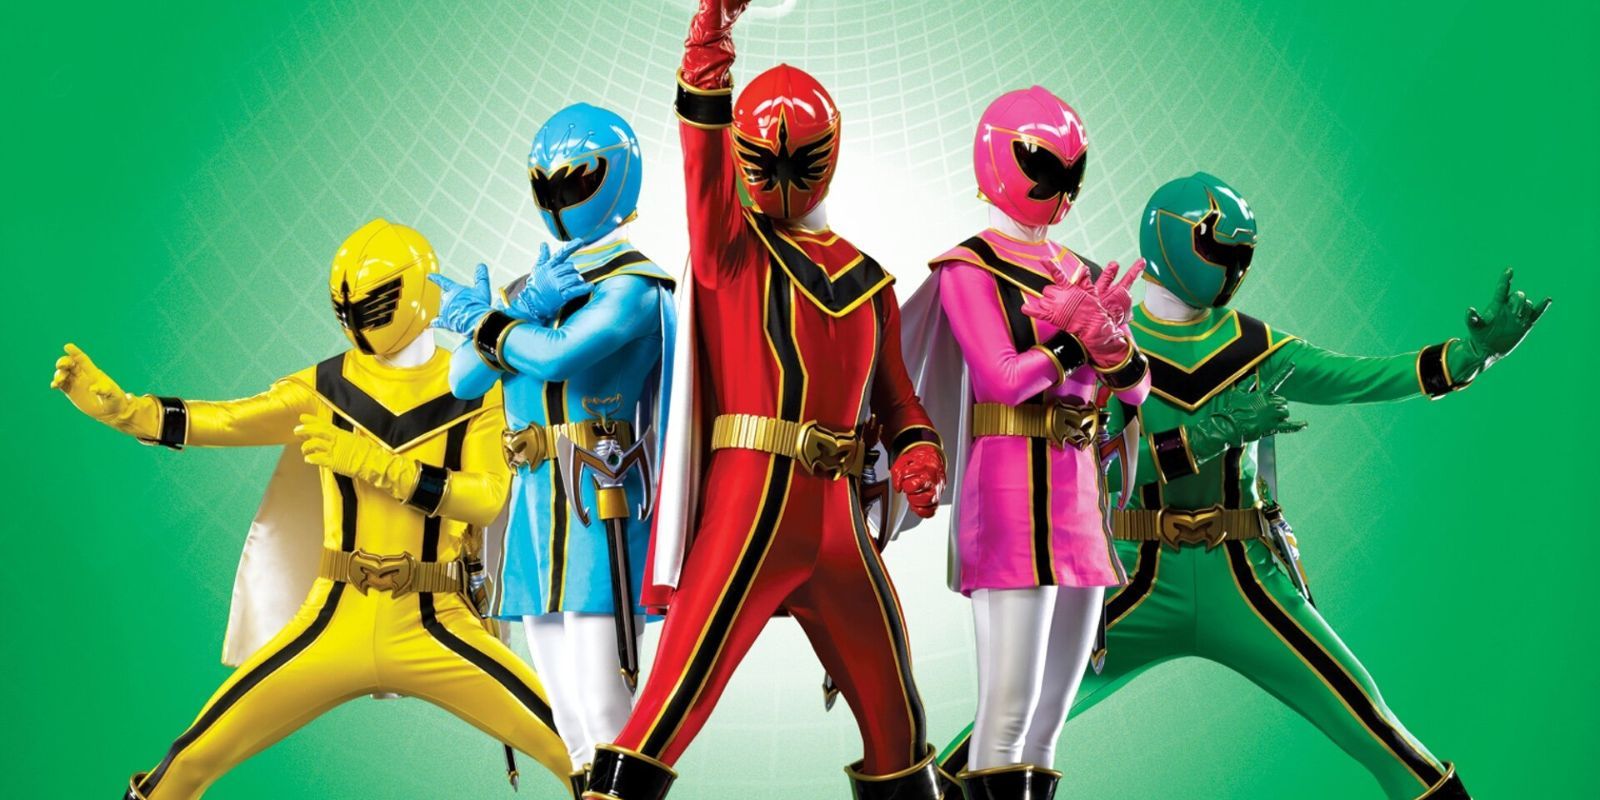 The Rangers in Mystic Force